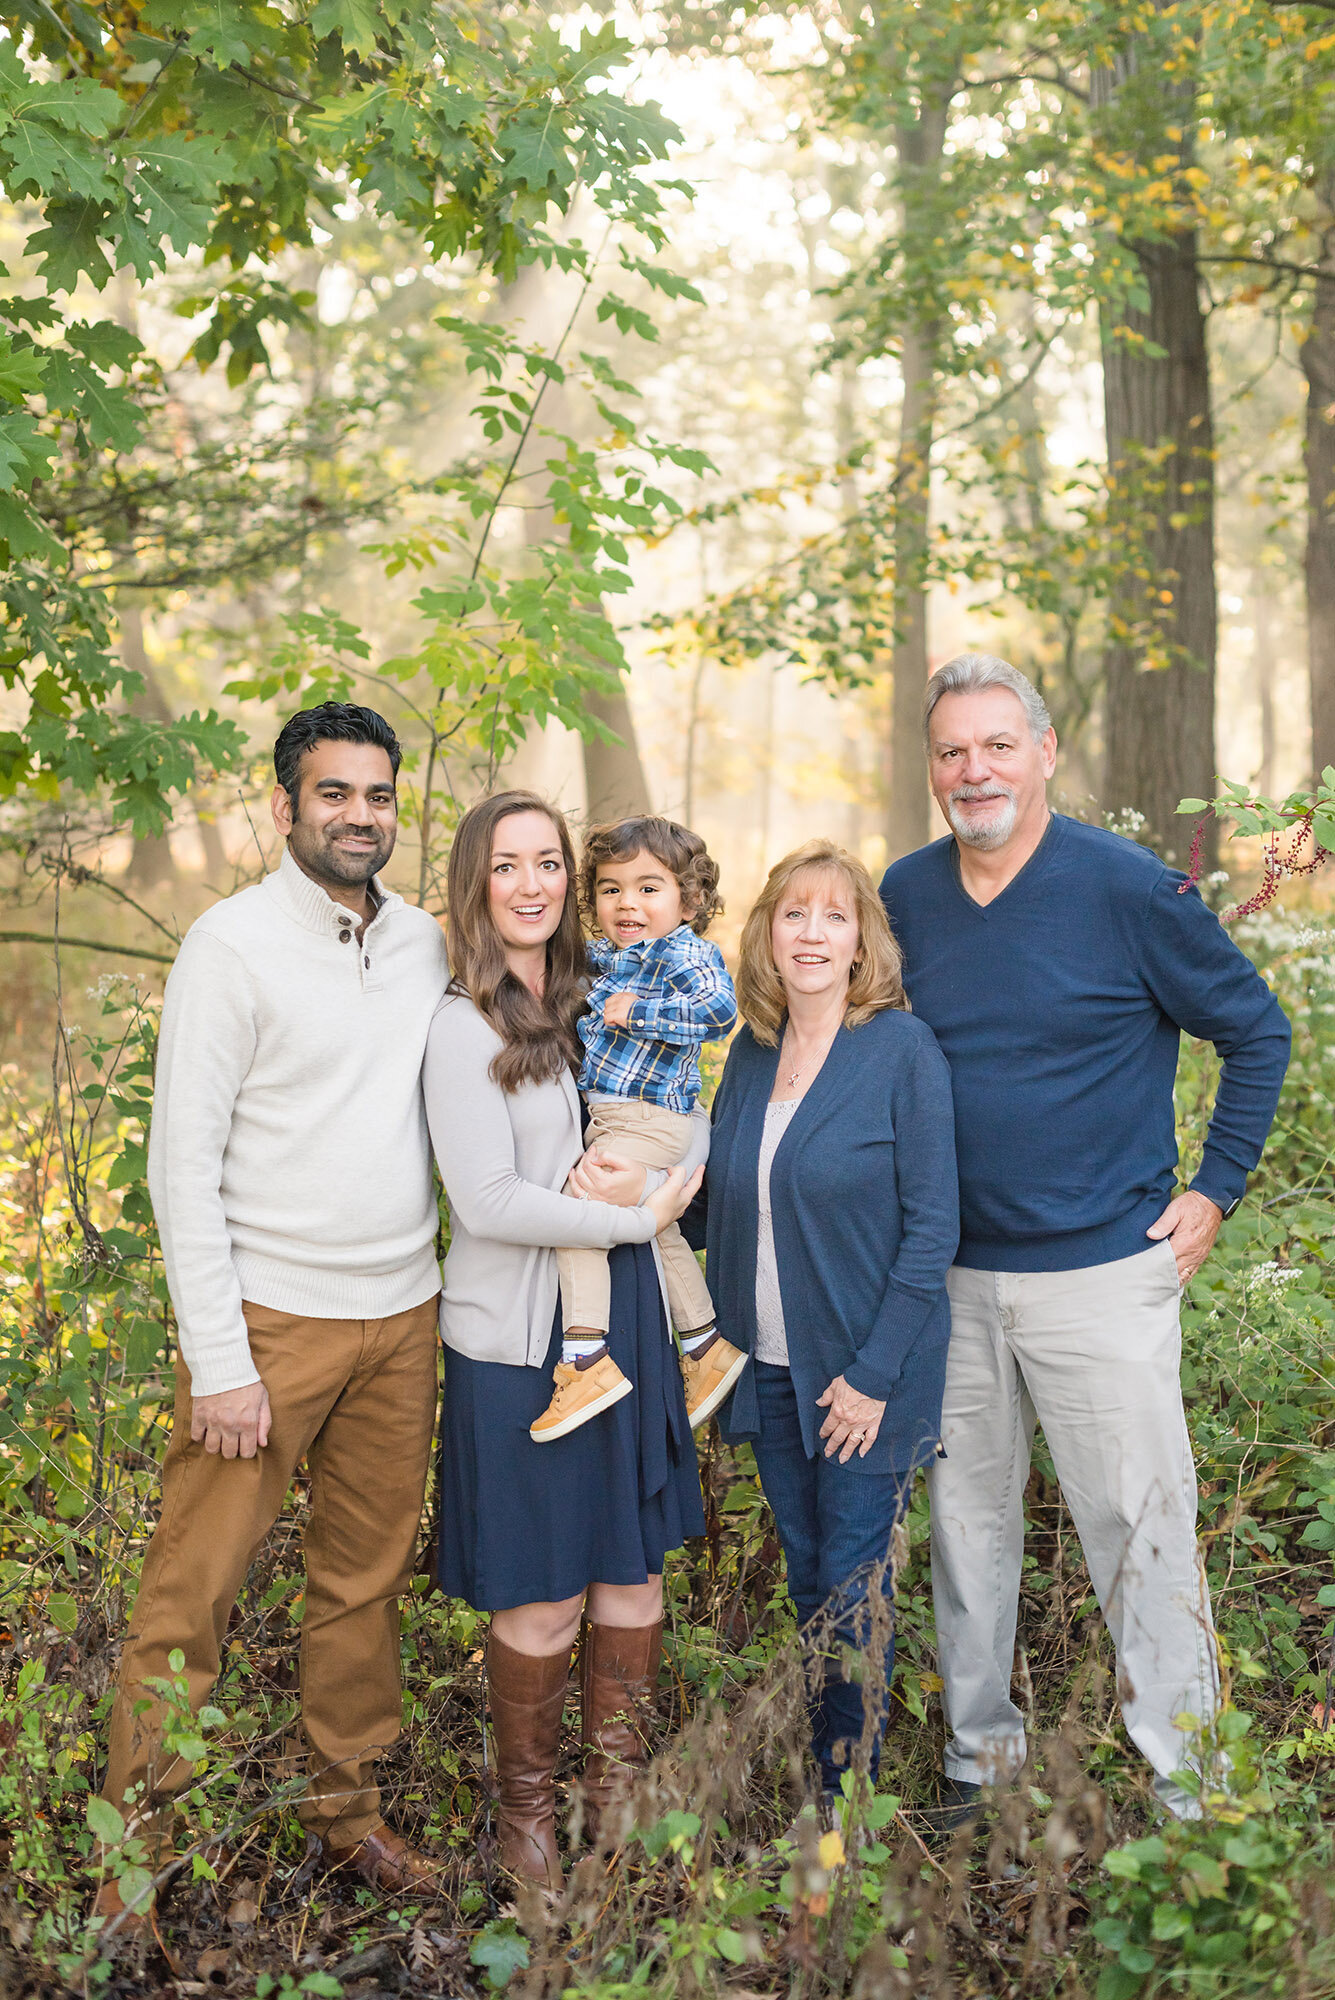 Family photos with grandparents in the fall woods